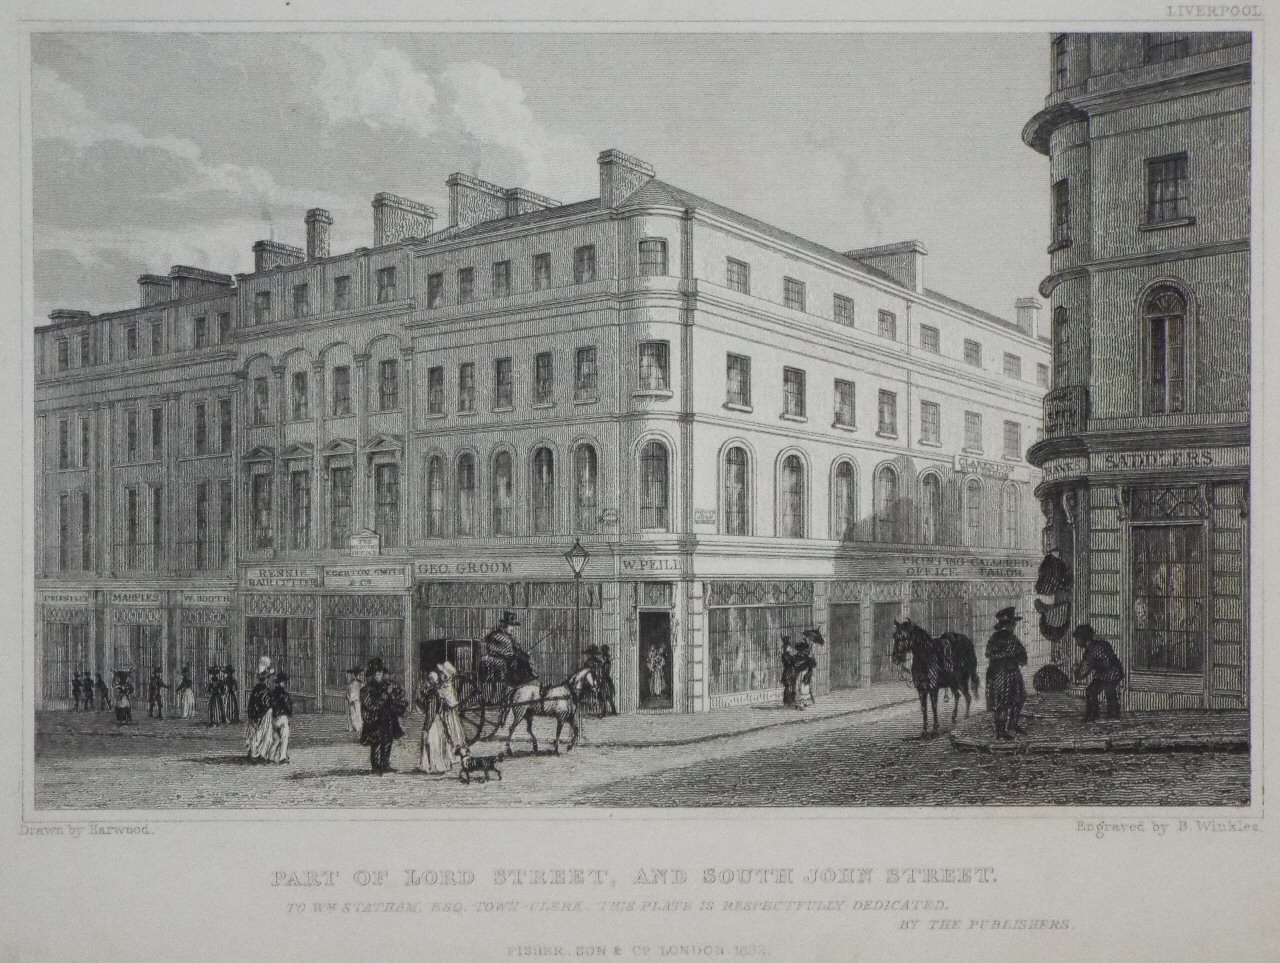 Print - Part of Lord Street, and South John Street. - Winkles